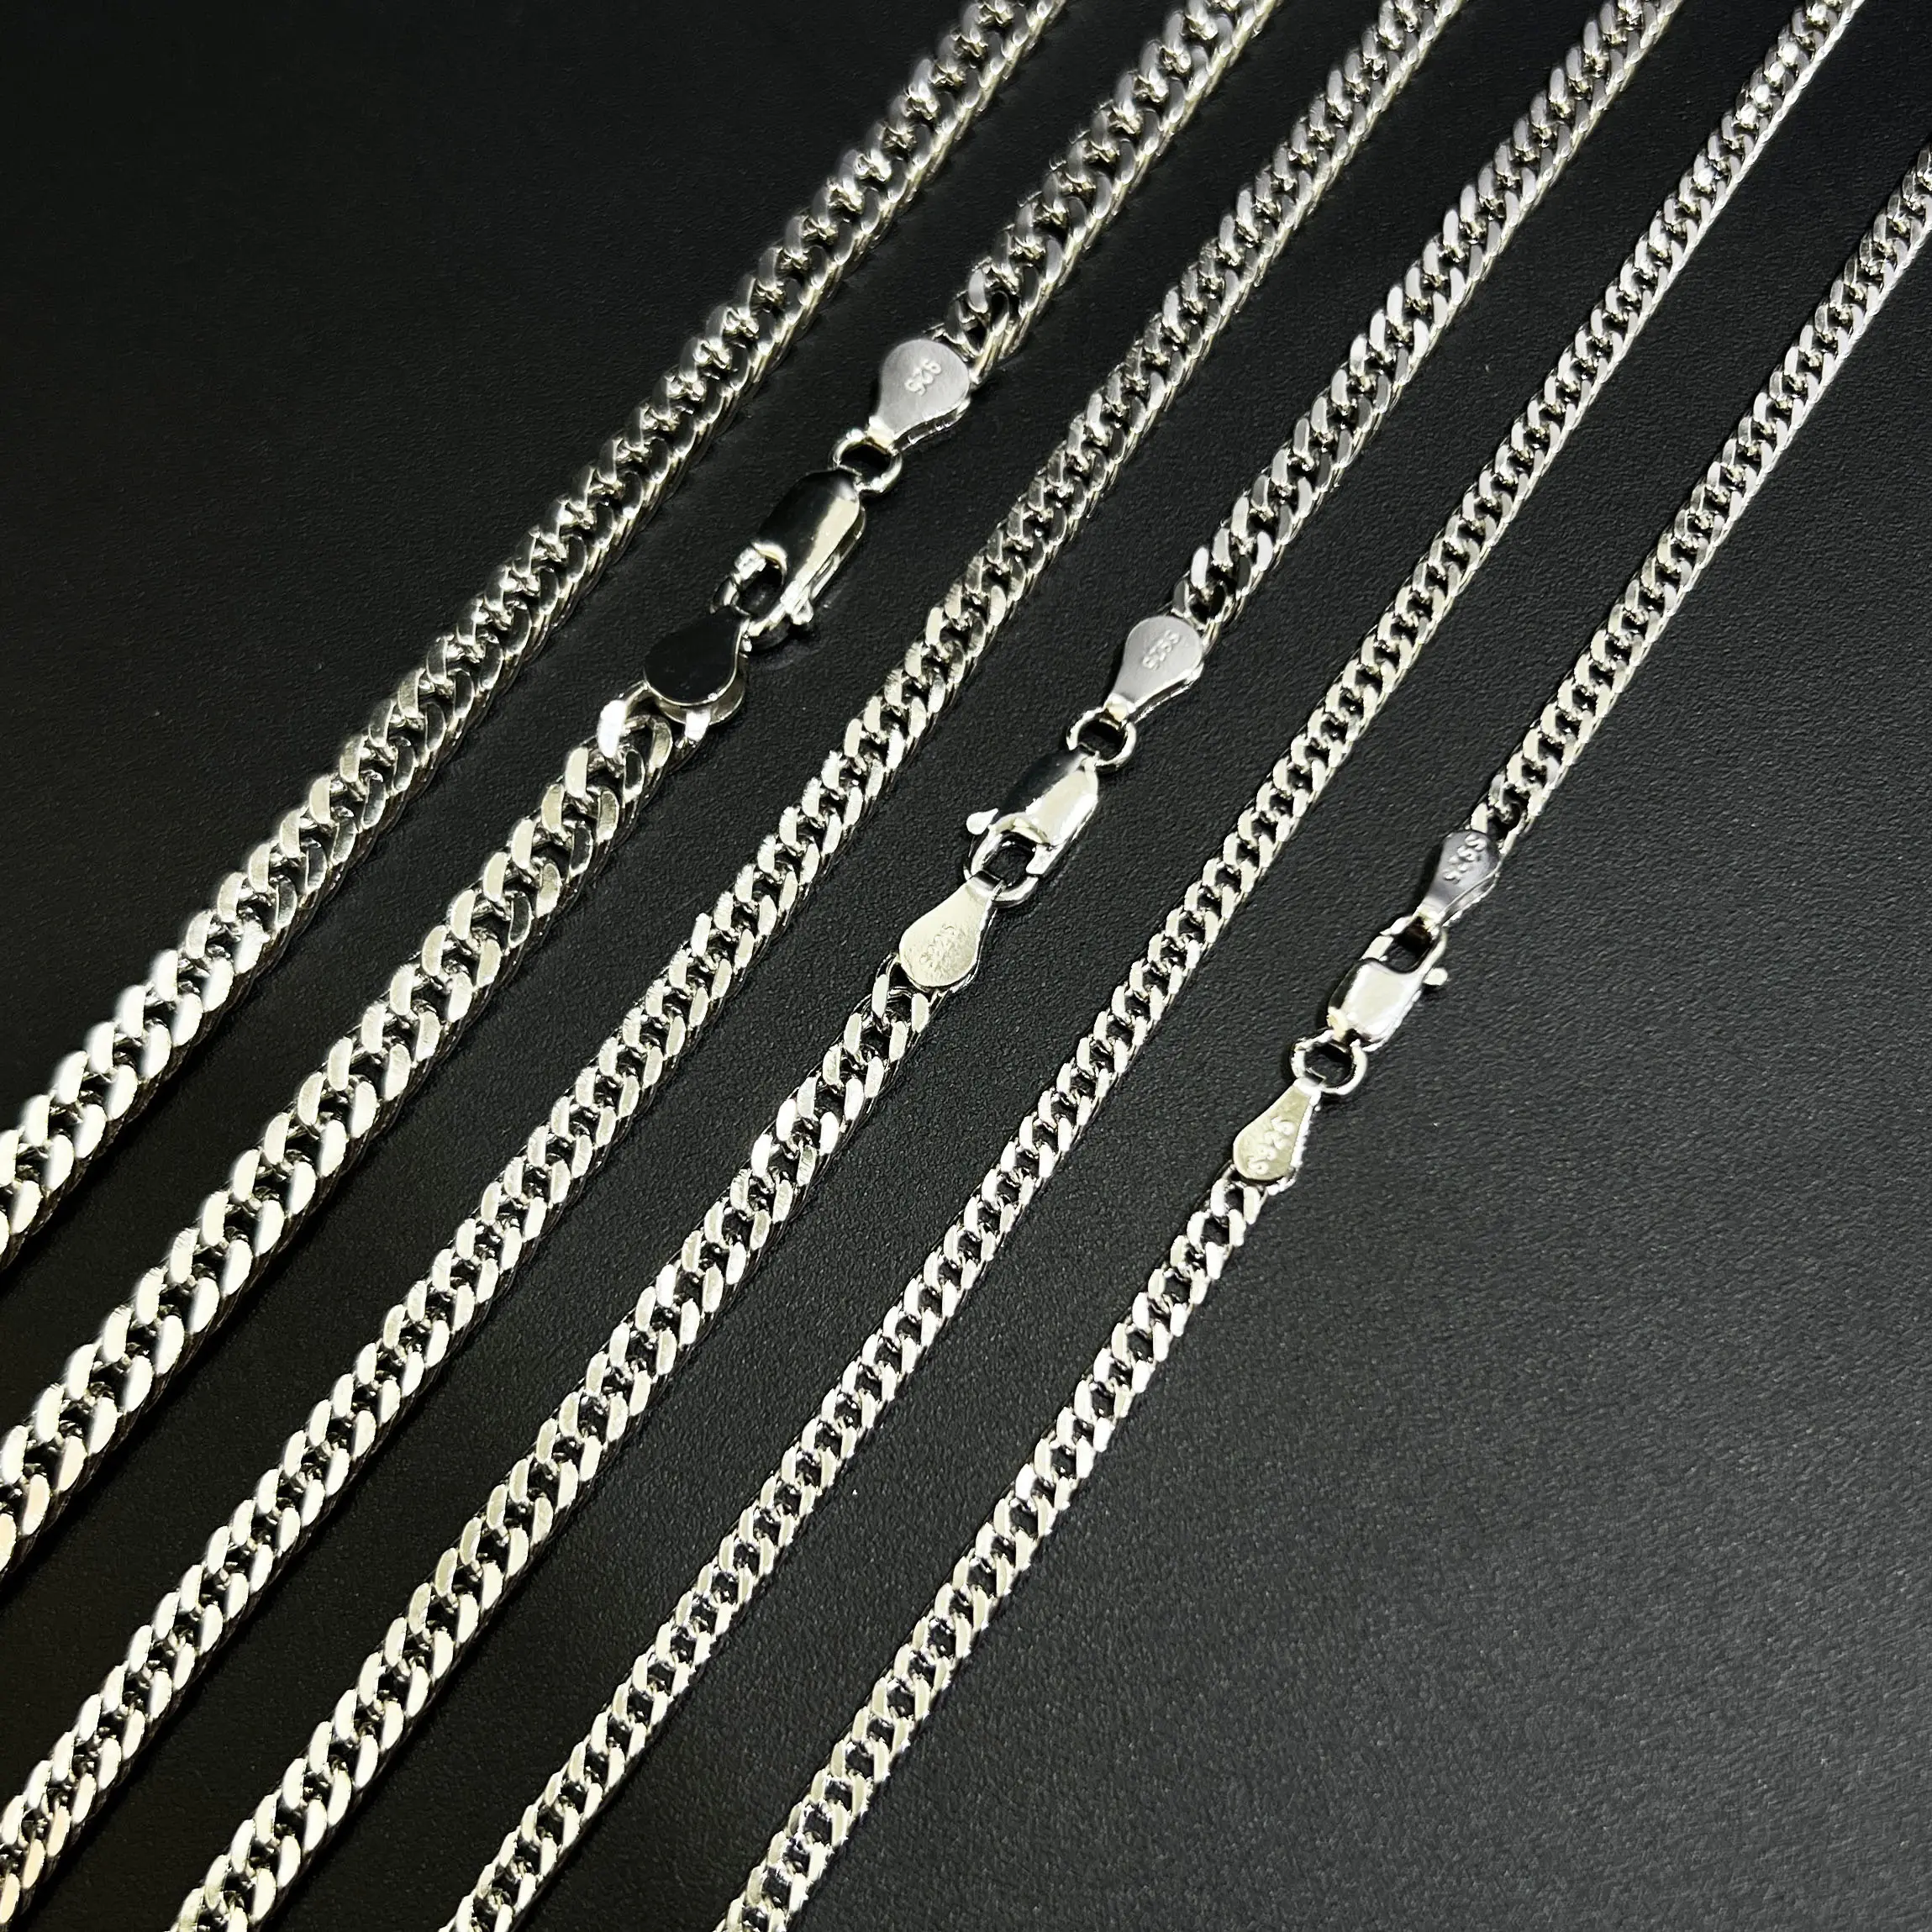 925 Sterling Silver Cuban Link Chain 925 Sterling Silver Italy Jewelry Necklace Rope Chain Fine Jewelry For Man Woman